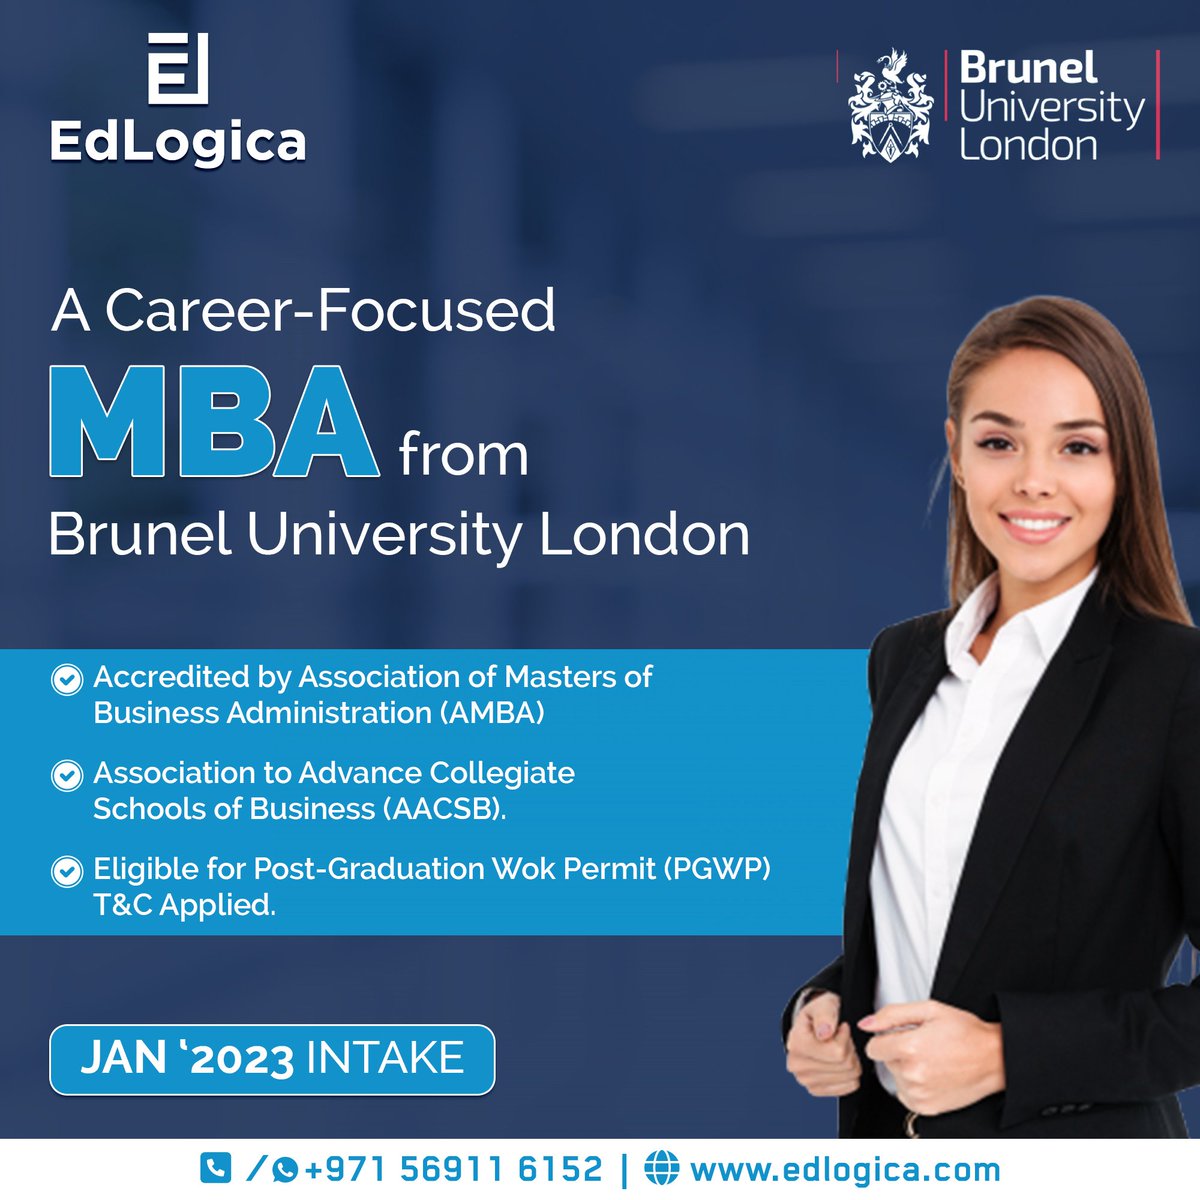 Earn your MBA from a (AMBA) & (AACSB) accredited University in UK

Apply now for the Jan 2023 intake to gain your MBA at Brunel University London.

Contact us to know more!

Reach us on:
EdLogica UAE - +971 569 11 6152
Website: edlogica.com

#edlogica #MBAinUK